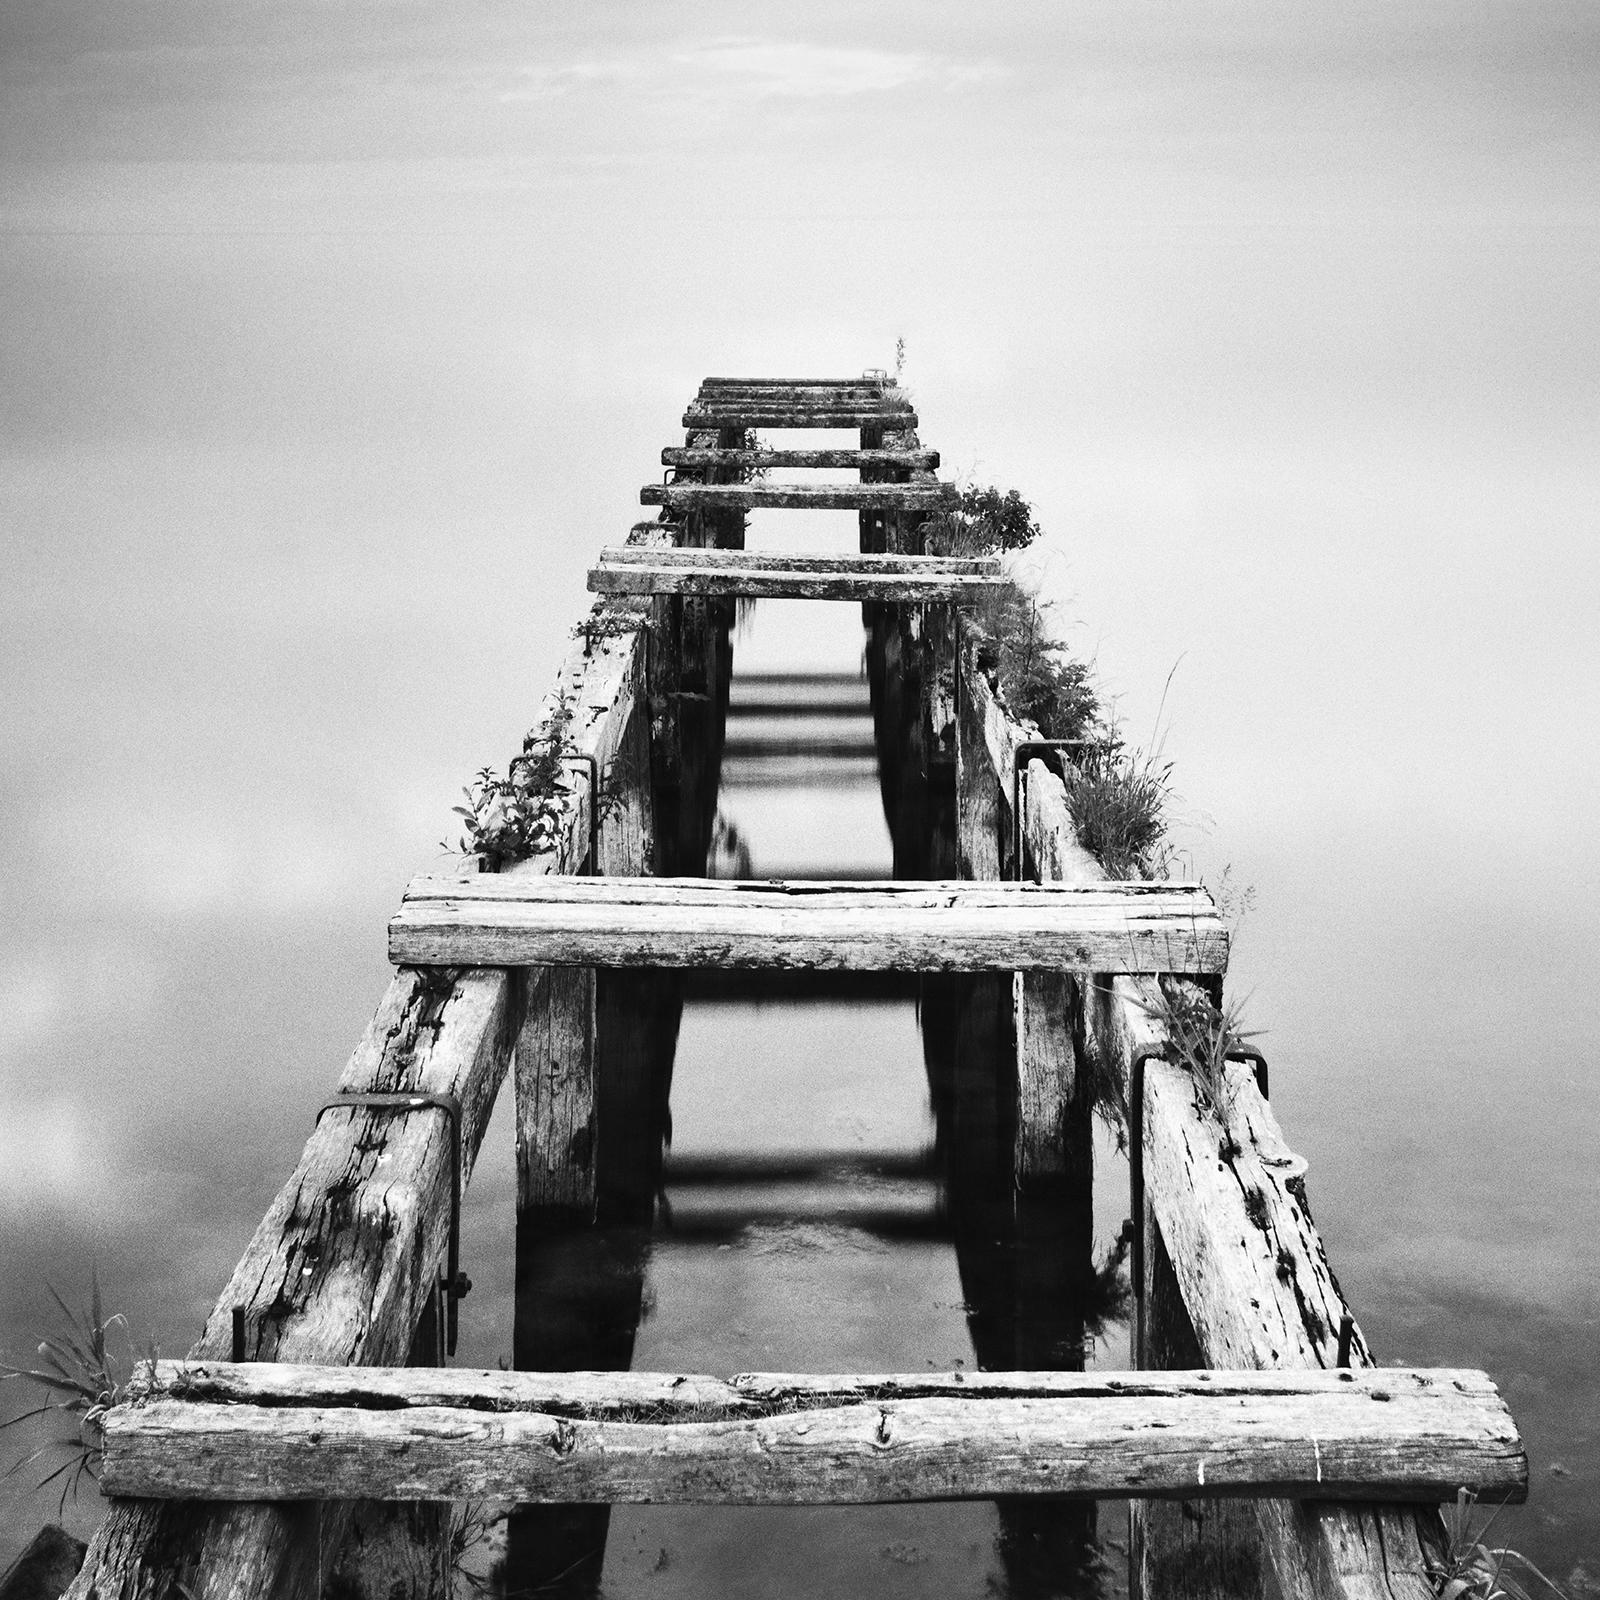 Black and white fine art long exposure waterscape - seascape photography. Abandoned wooden pier at night, Ireland. Archival pigment ink print, edition of 9. Signed, titled, dated and numbered by artist. Certificate of authenticity included. Printed